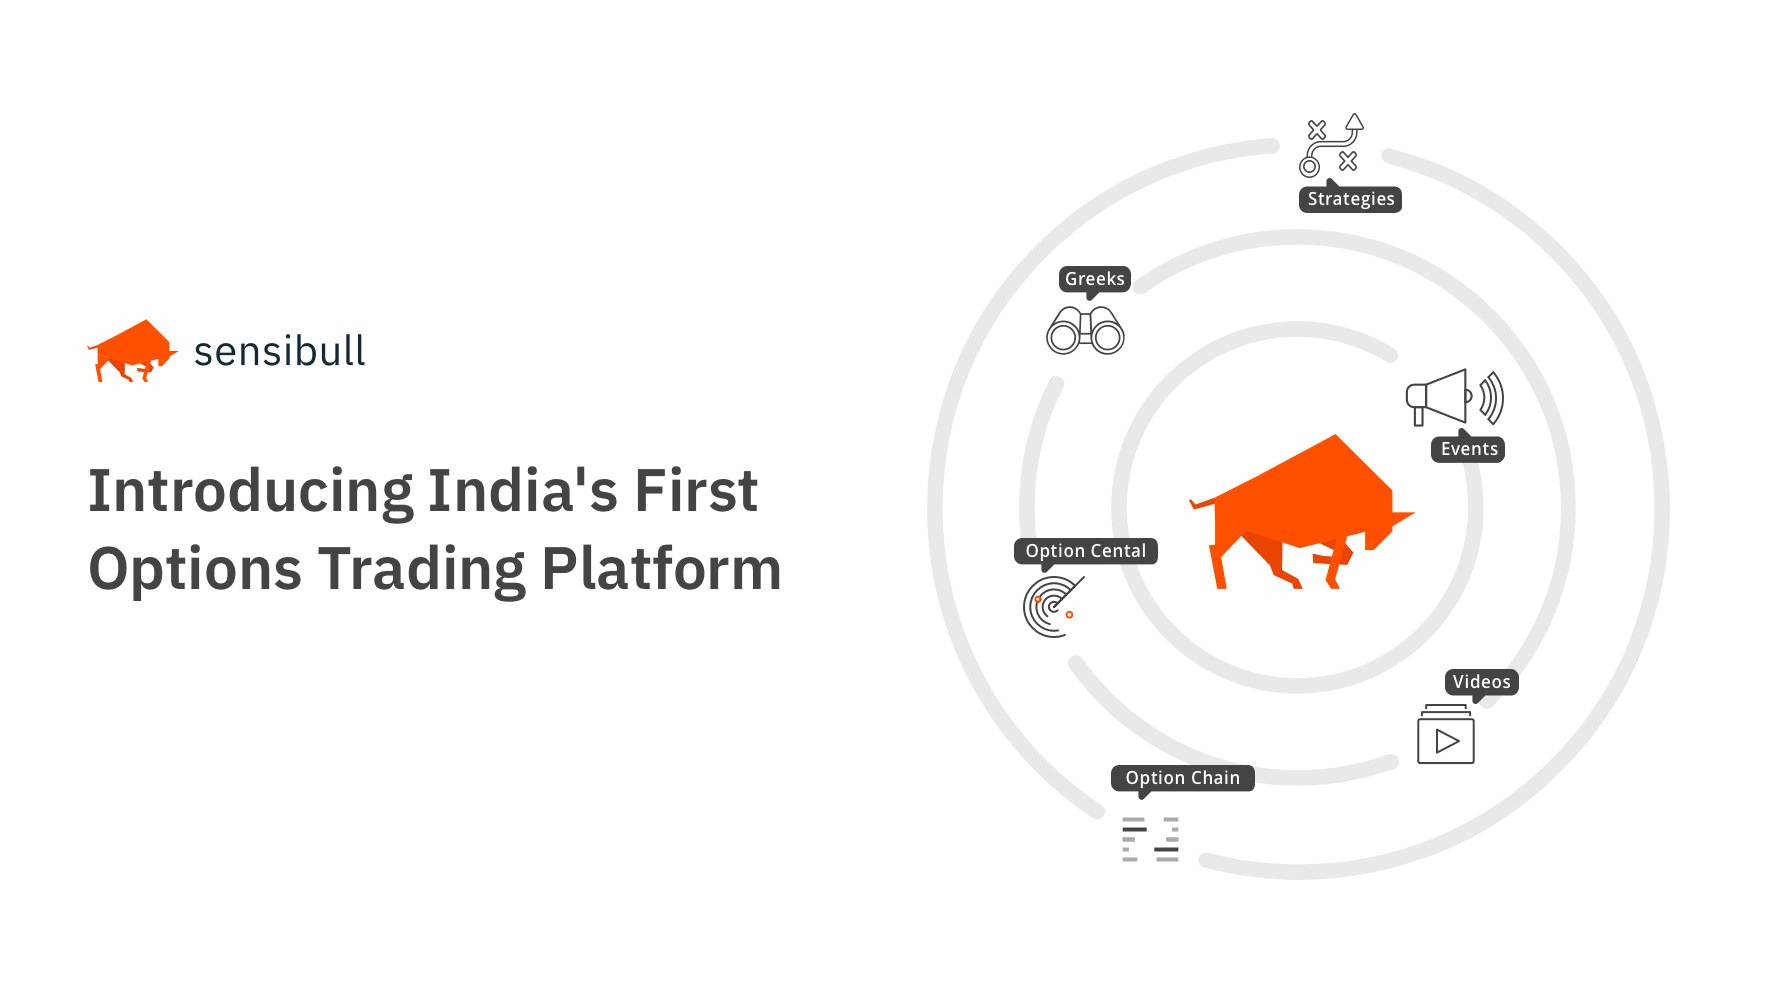 Zerodha invests 2.5 crores in an options trading startup Sensibull